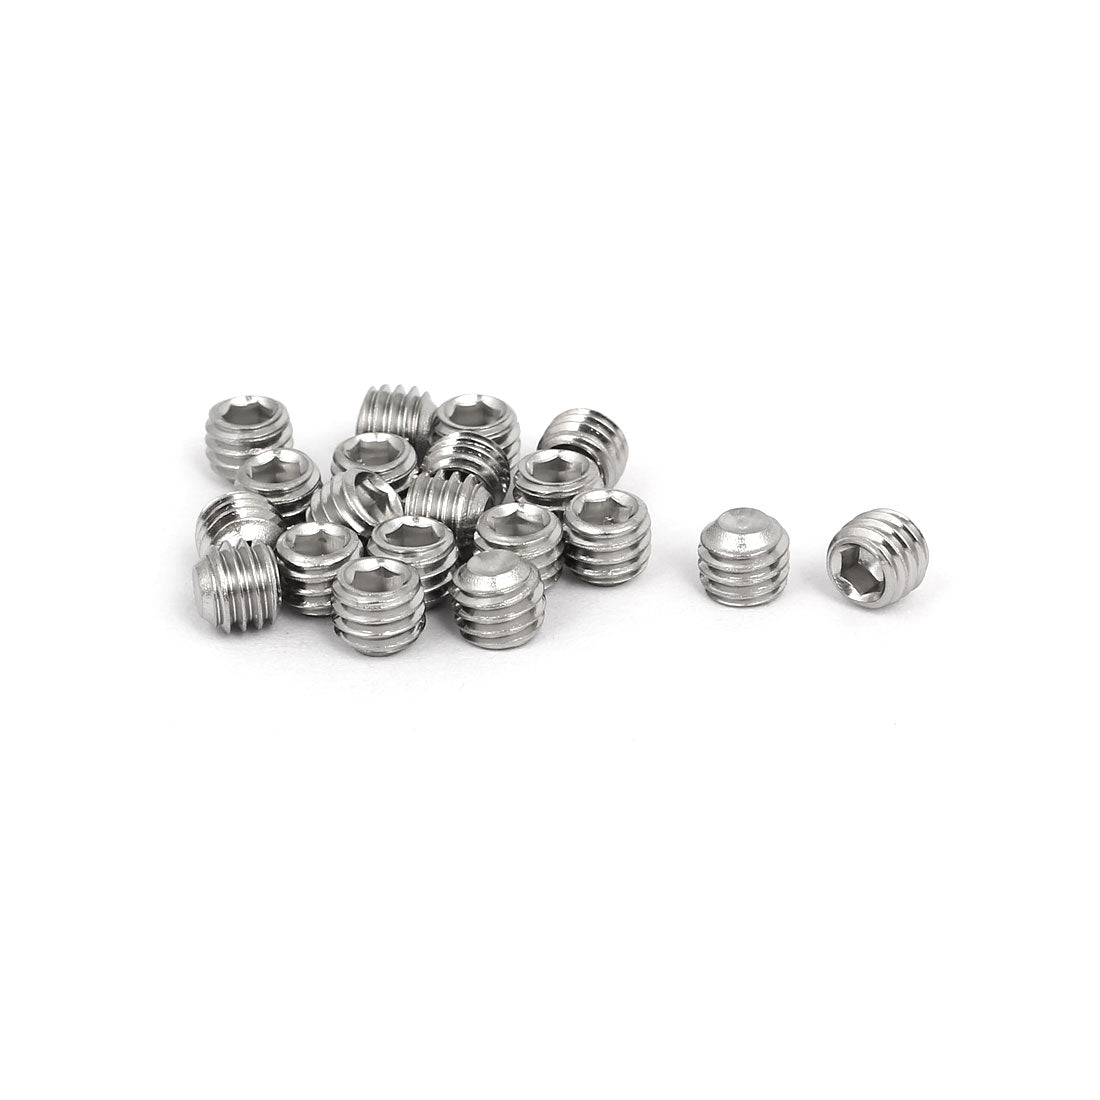 uxcell Uxcell M6x5mm 316 Stainless Steel Hex Socket Cup Point Grub Set Screws 20pcs